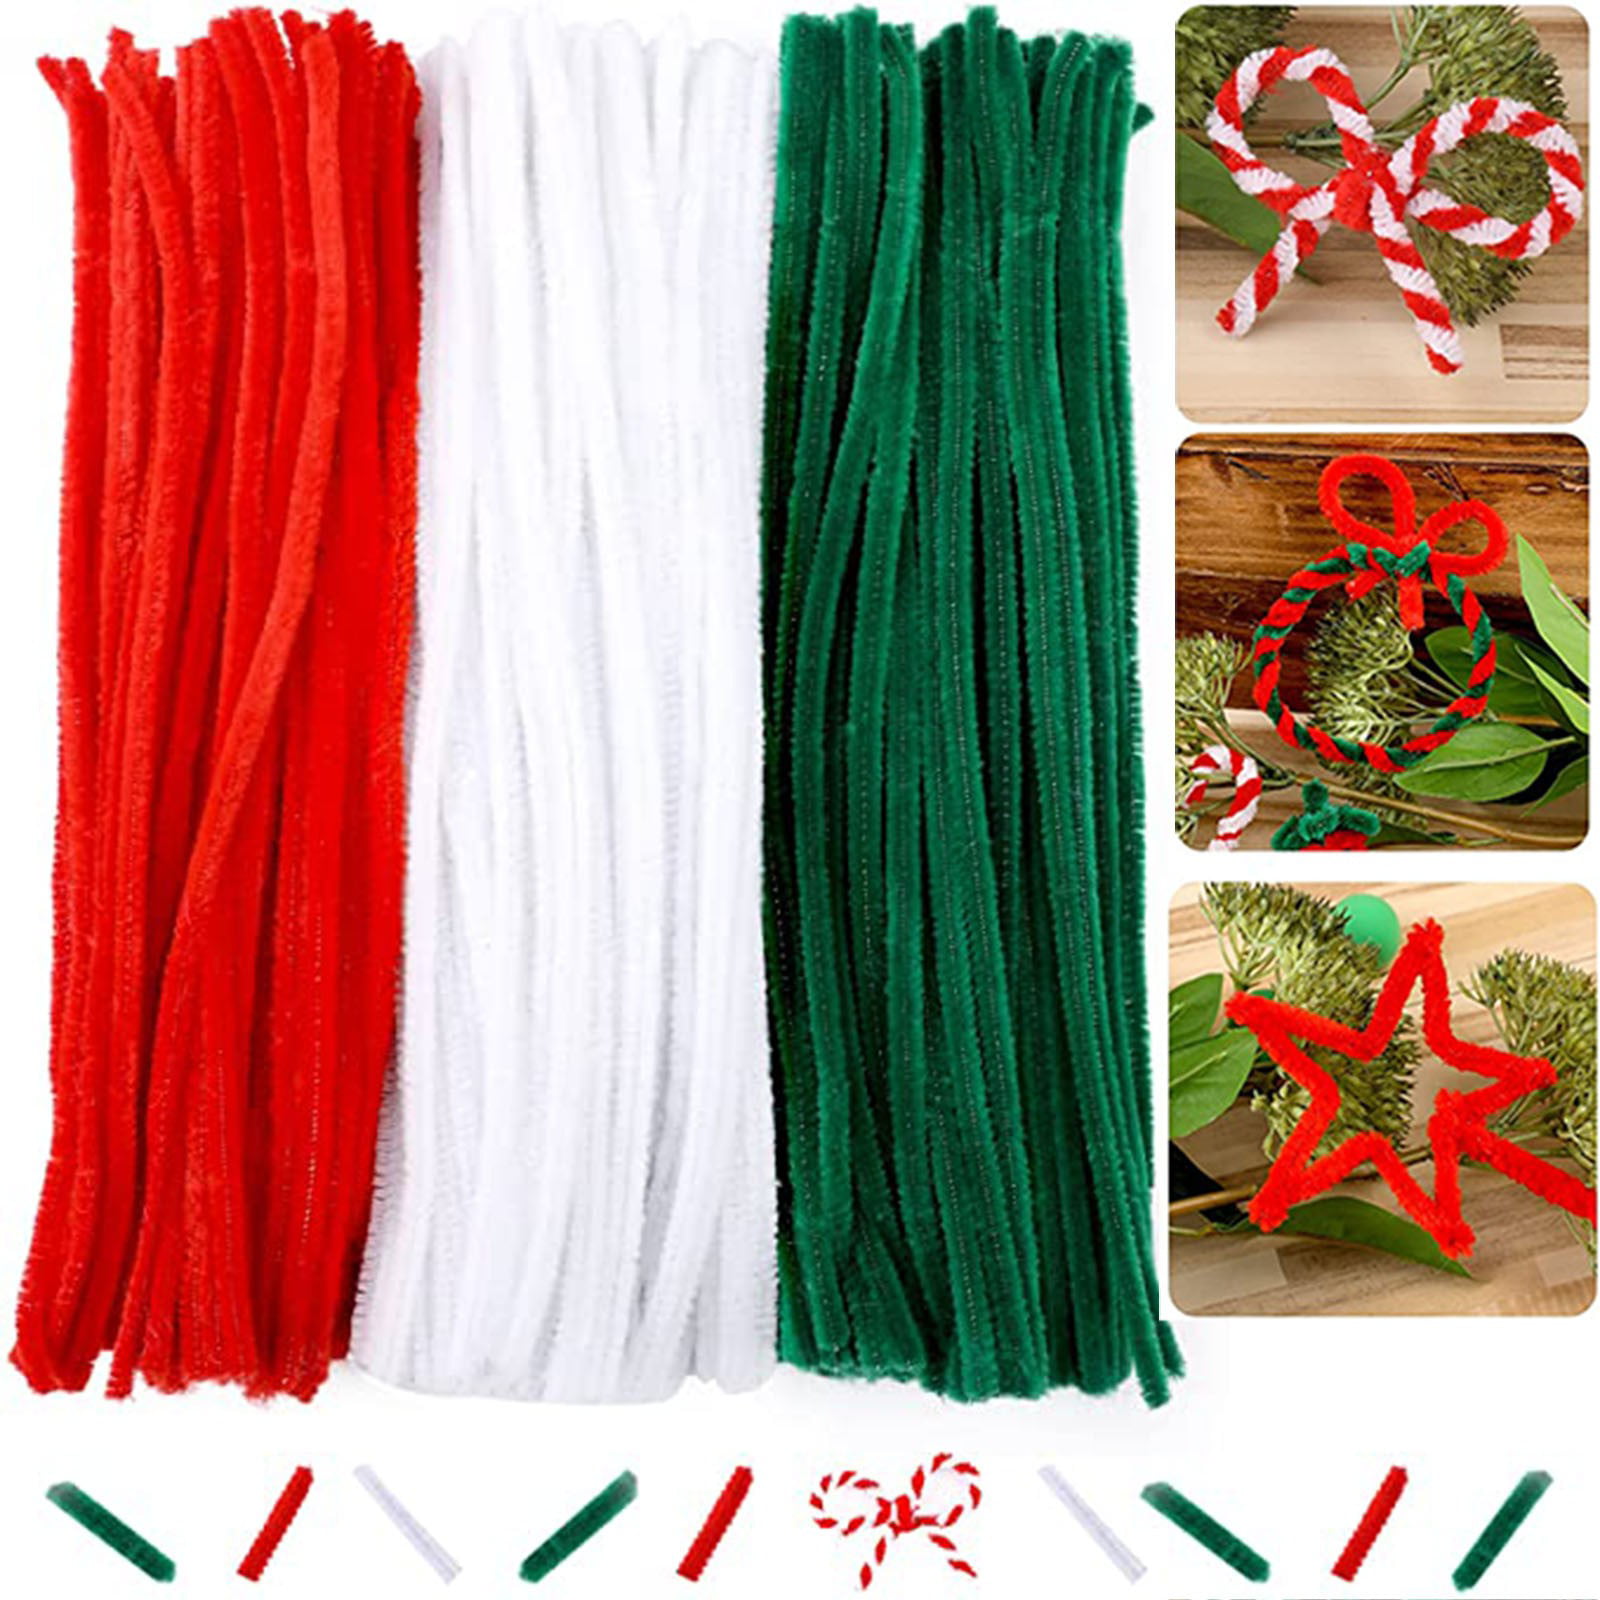 Red+Green+White Pipe Cleaners Chenille Stems Craft Pipe Cleaners Pipe Cleaners Bulk 210PCS Pipe Cleaners Art Pipe Cleaners for Creative Christmas Decoration Supplies 